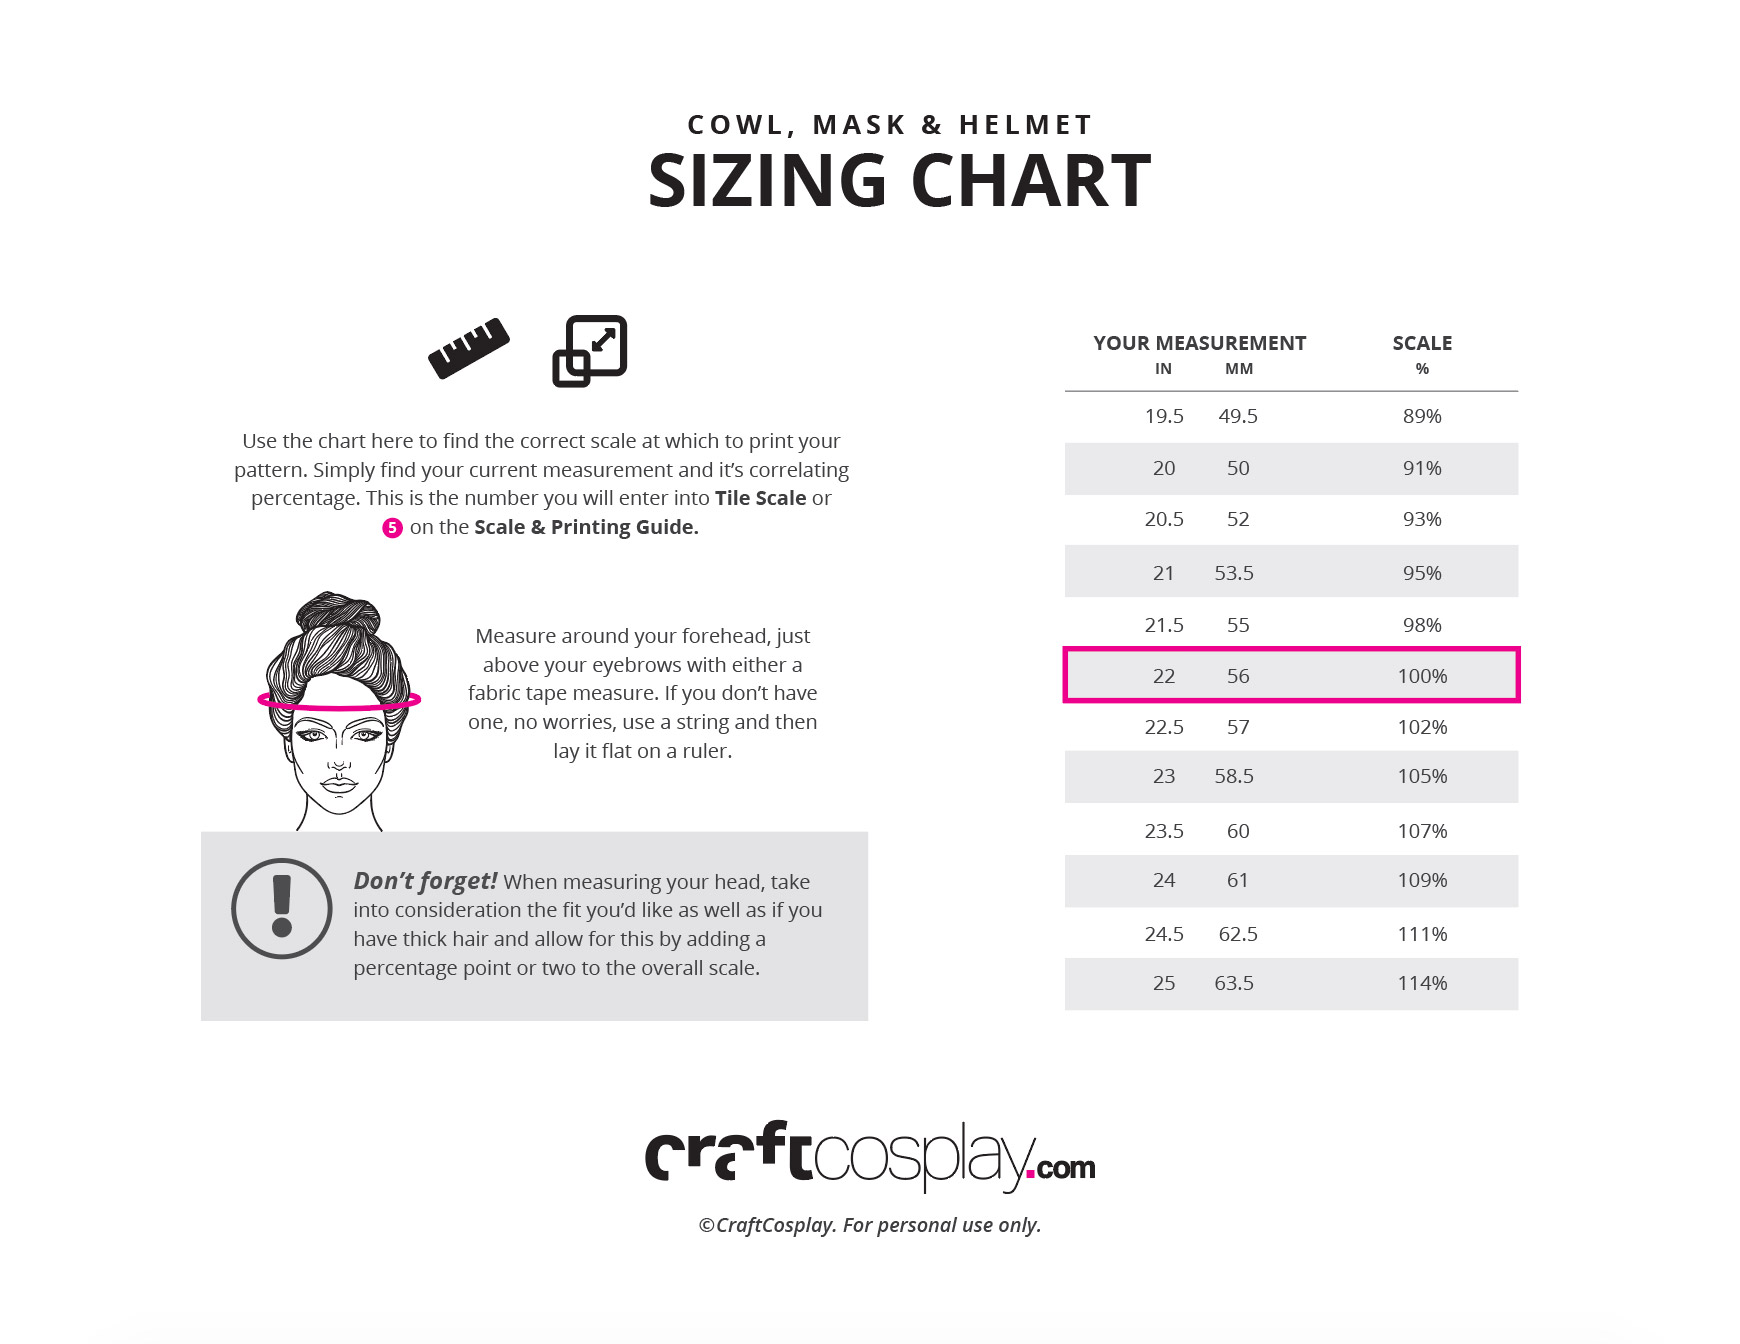 CraftCosplay Sizing Chart